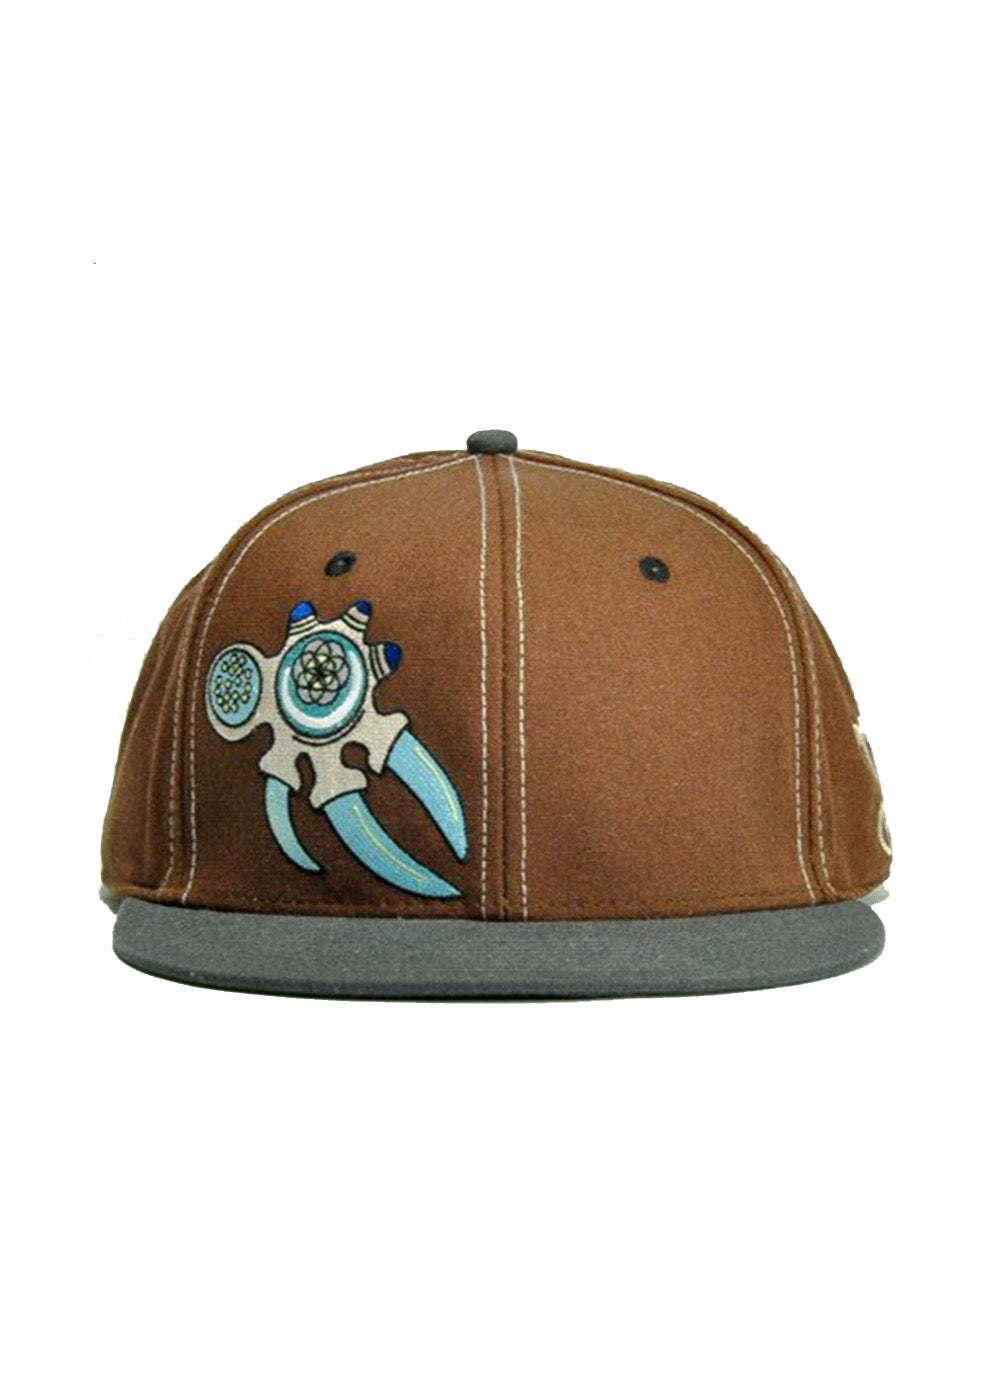 Grassroots Uba2ba Fitted Hat